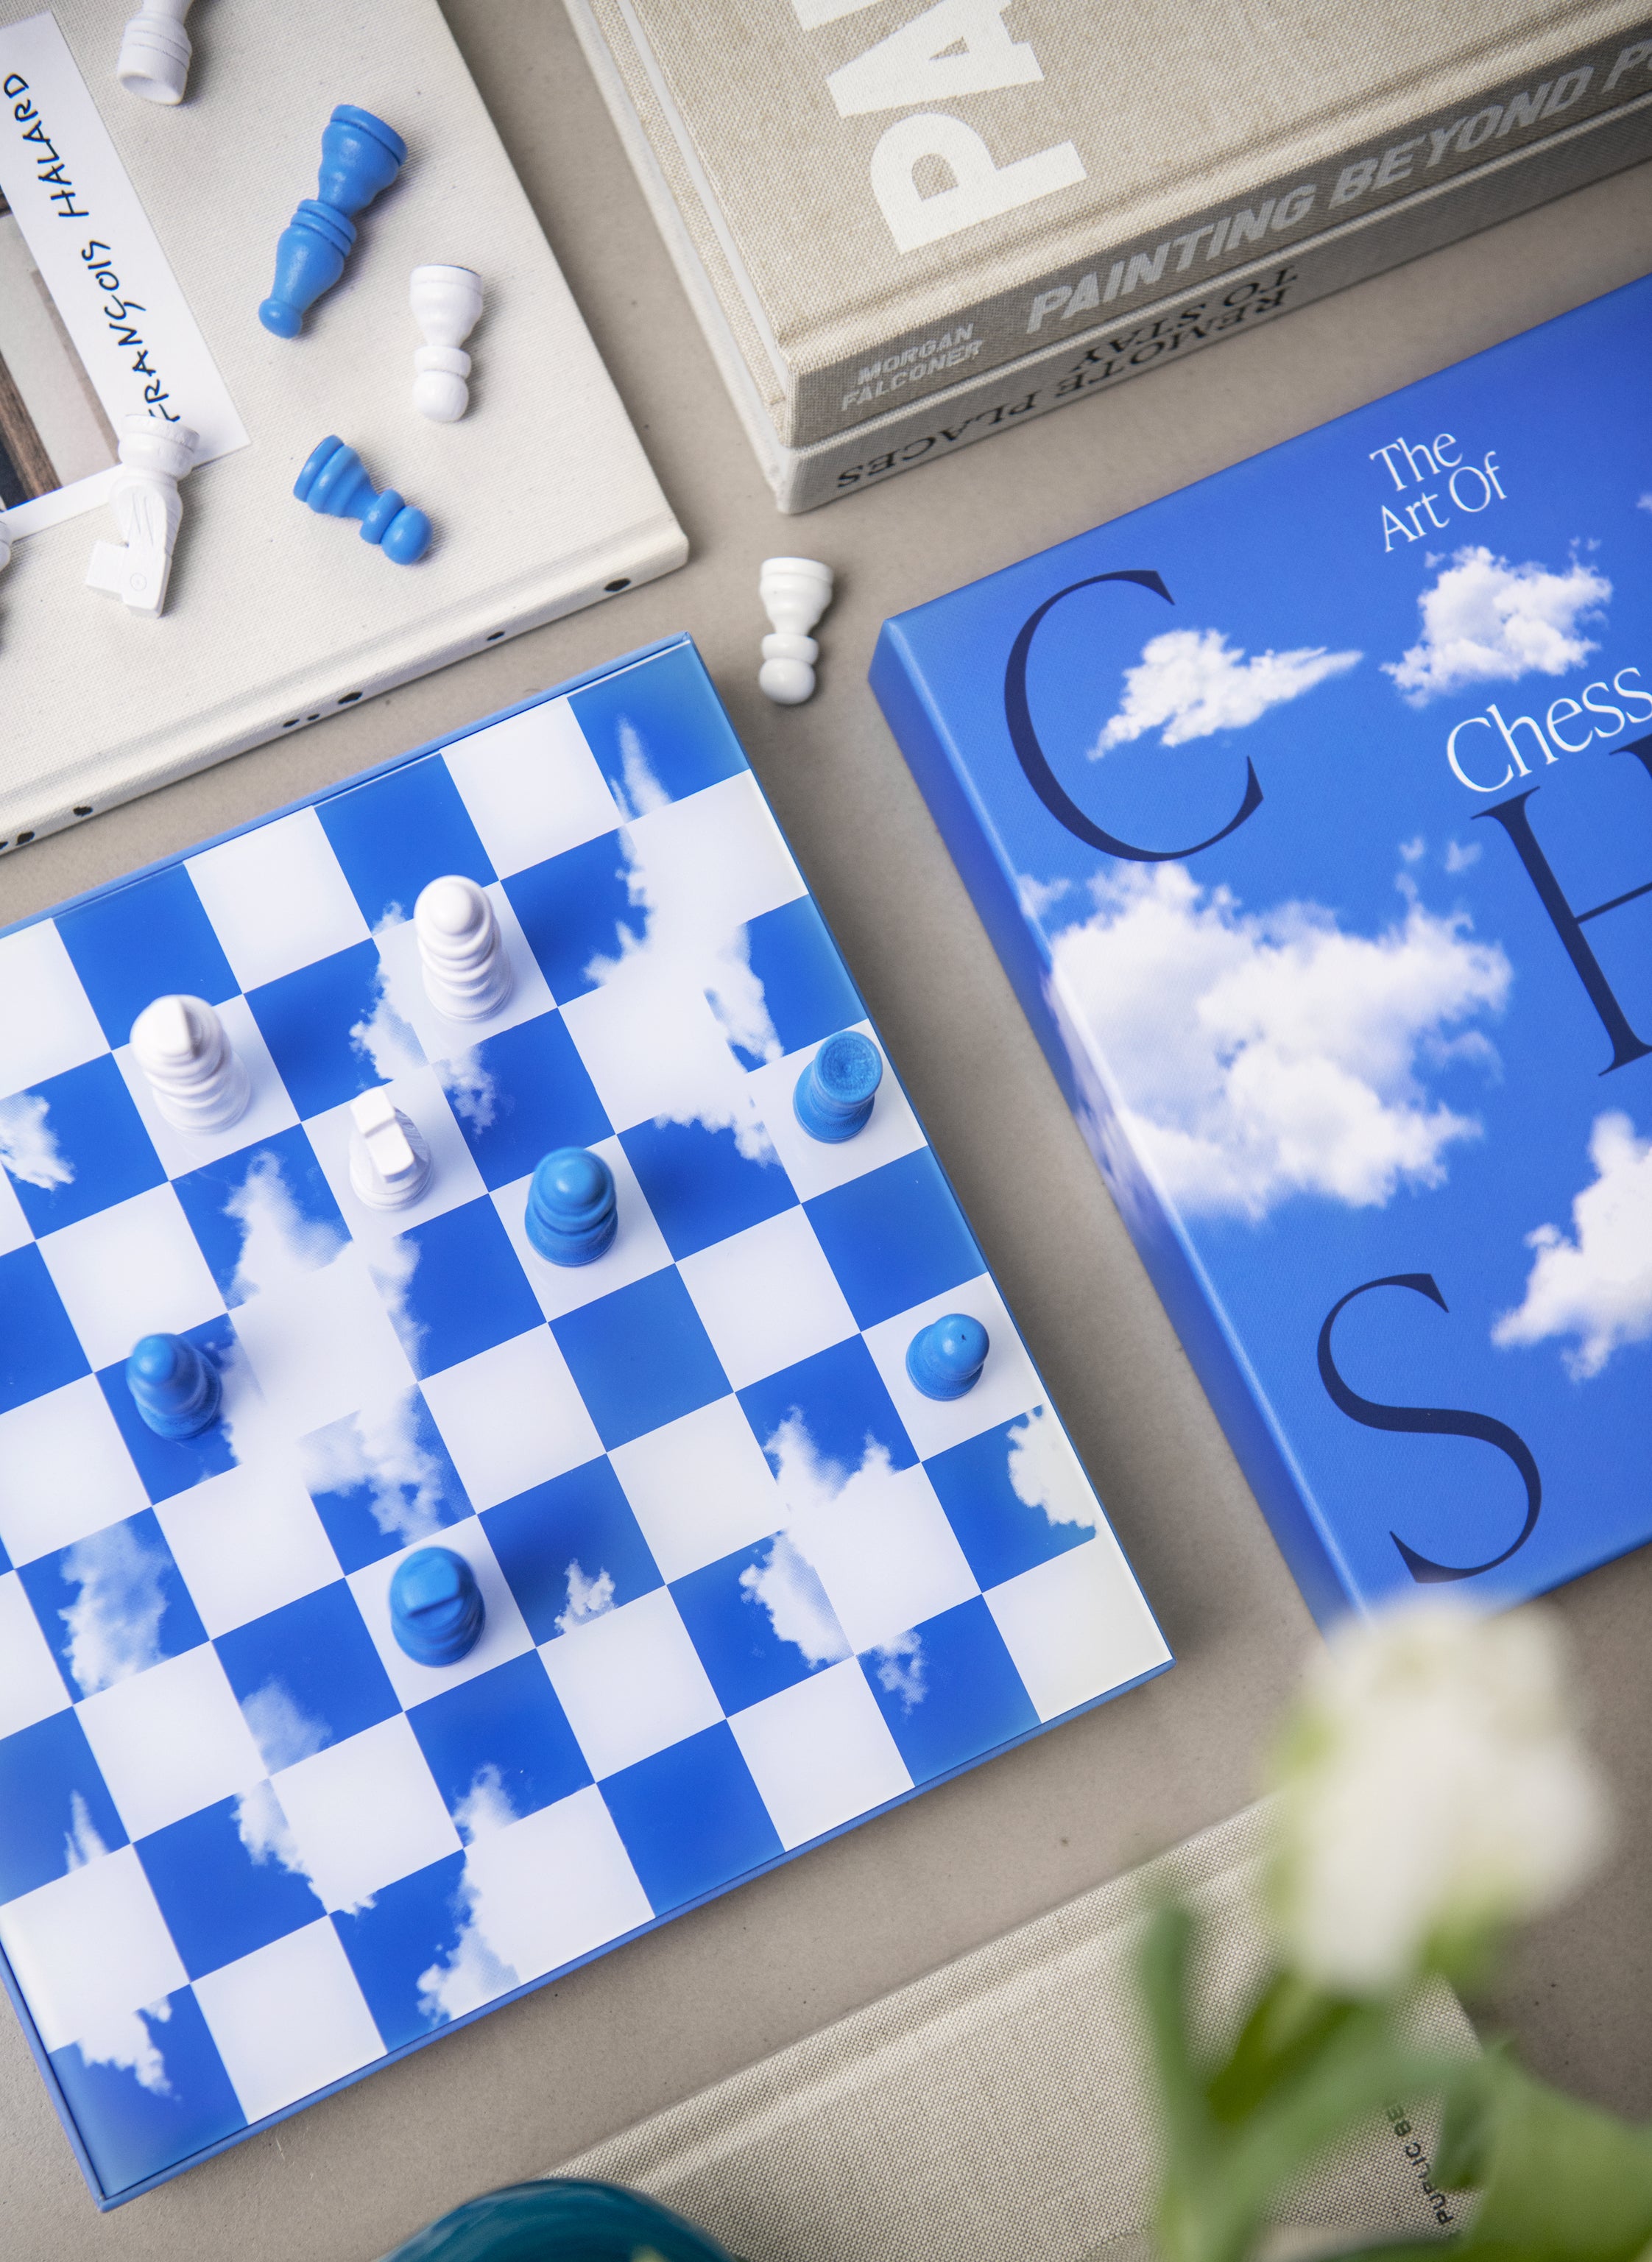 PRINTWORKS The Art of Chess Clouds